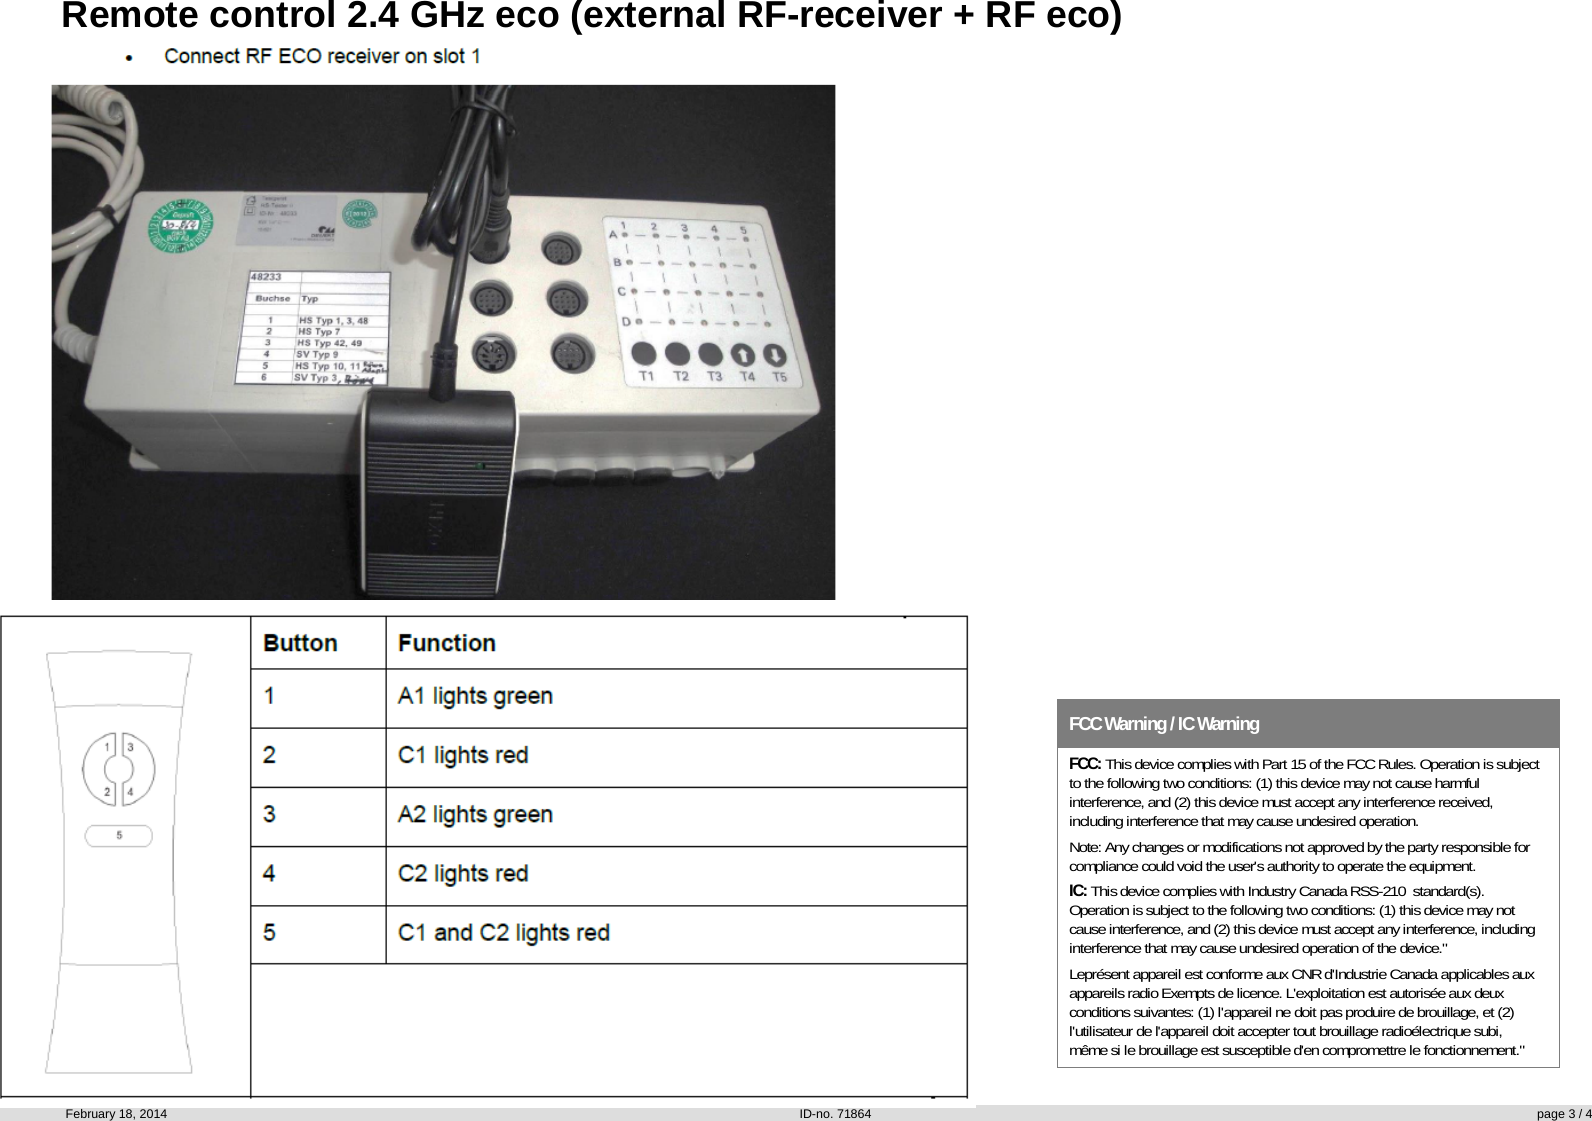 Remote control 2.4 GHz eco (external RF-receiver + RF eco)February 18, 2014  ID-no. 71864 page 3 / 4    FCC Warning / IC Warning FCC: This device complies with Part 15 of the FCC Rules. Operation is subject to the following two conditions: (1) this device may not cause harmful interference, and (2) this device must accept any interference received, including interference that may cause undesired operation. Note: Any changes or modifications not approved by the party responsible for compliance could void the user&apos;s authority to operate the equipment. IC: This device complies with Industry Canada RSS-210  standard(s). Operation is subject to the following two conditions: (1) this device may not cause interference, and (2) this device must accept any interference, including interference that may cause undesired operation of the device.&quot; Leprésent appareil est conforme aux CNR d&apos;Industrie Canada applicables aux appareils radio Exempts de licence. L&apos;exploitation est autorisée aux deux conditions suivantes: (1) l&apos;appareil ne doit pas produire de brouillage, et (2) l&apos;utilisateur de l&apos;appareil doit accepter tout brouillage radioélectrique subi, même si le brouillage est susceptible d&apos;en compromettre le fonctionnement.&quot;  